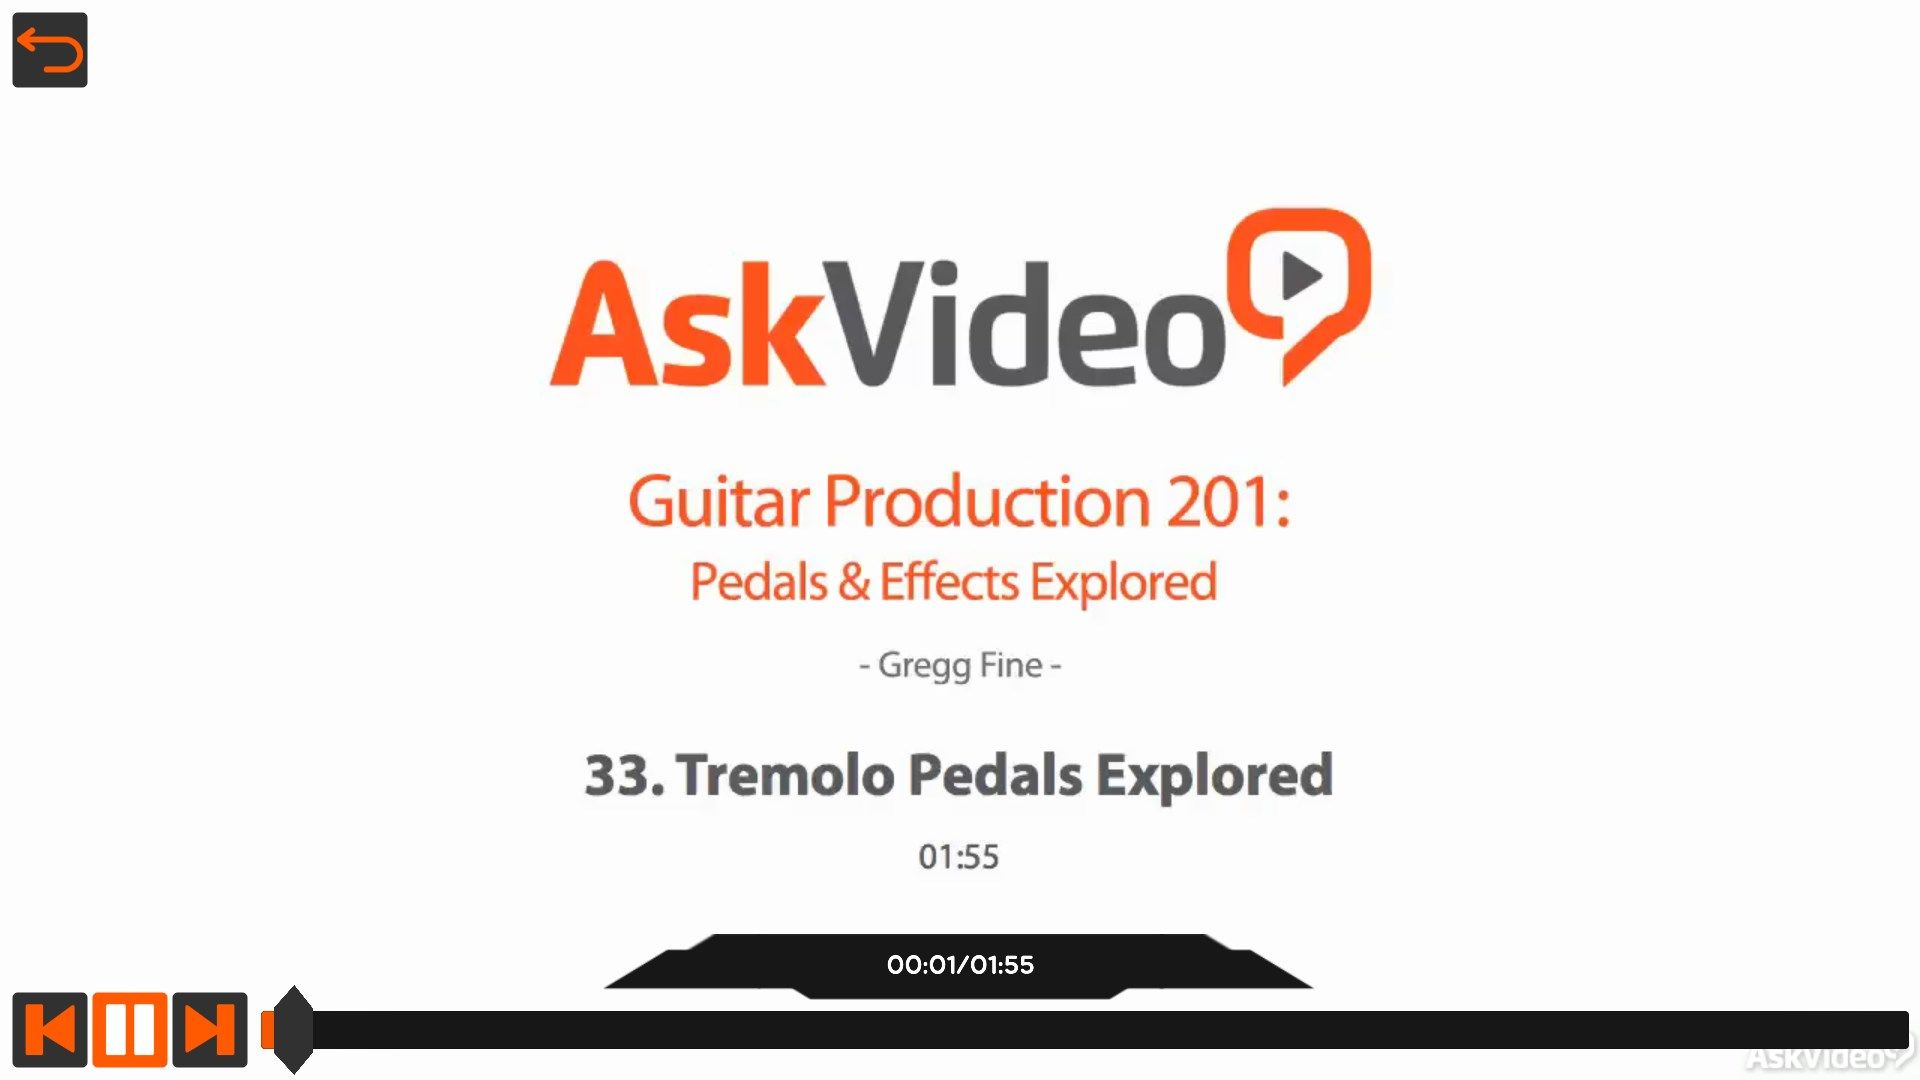 Pedals & Effects Course For Guitar Production